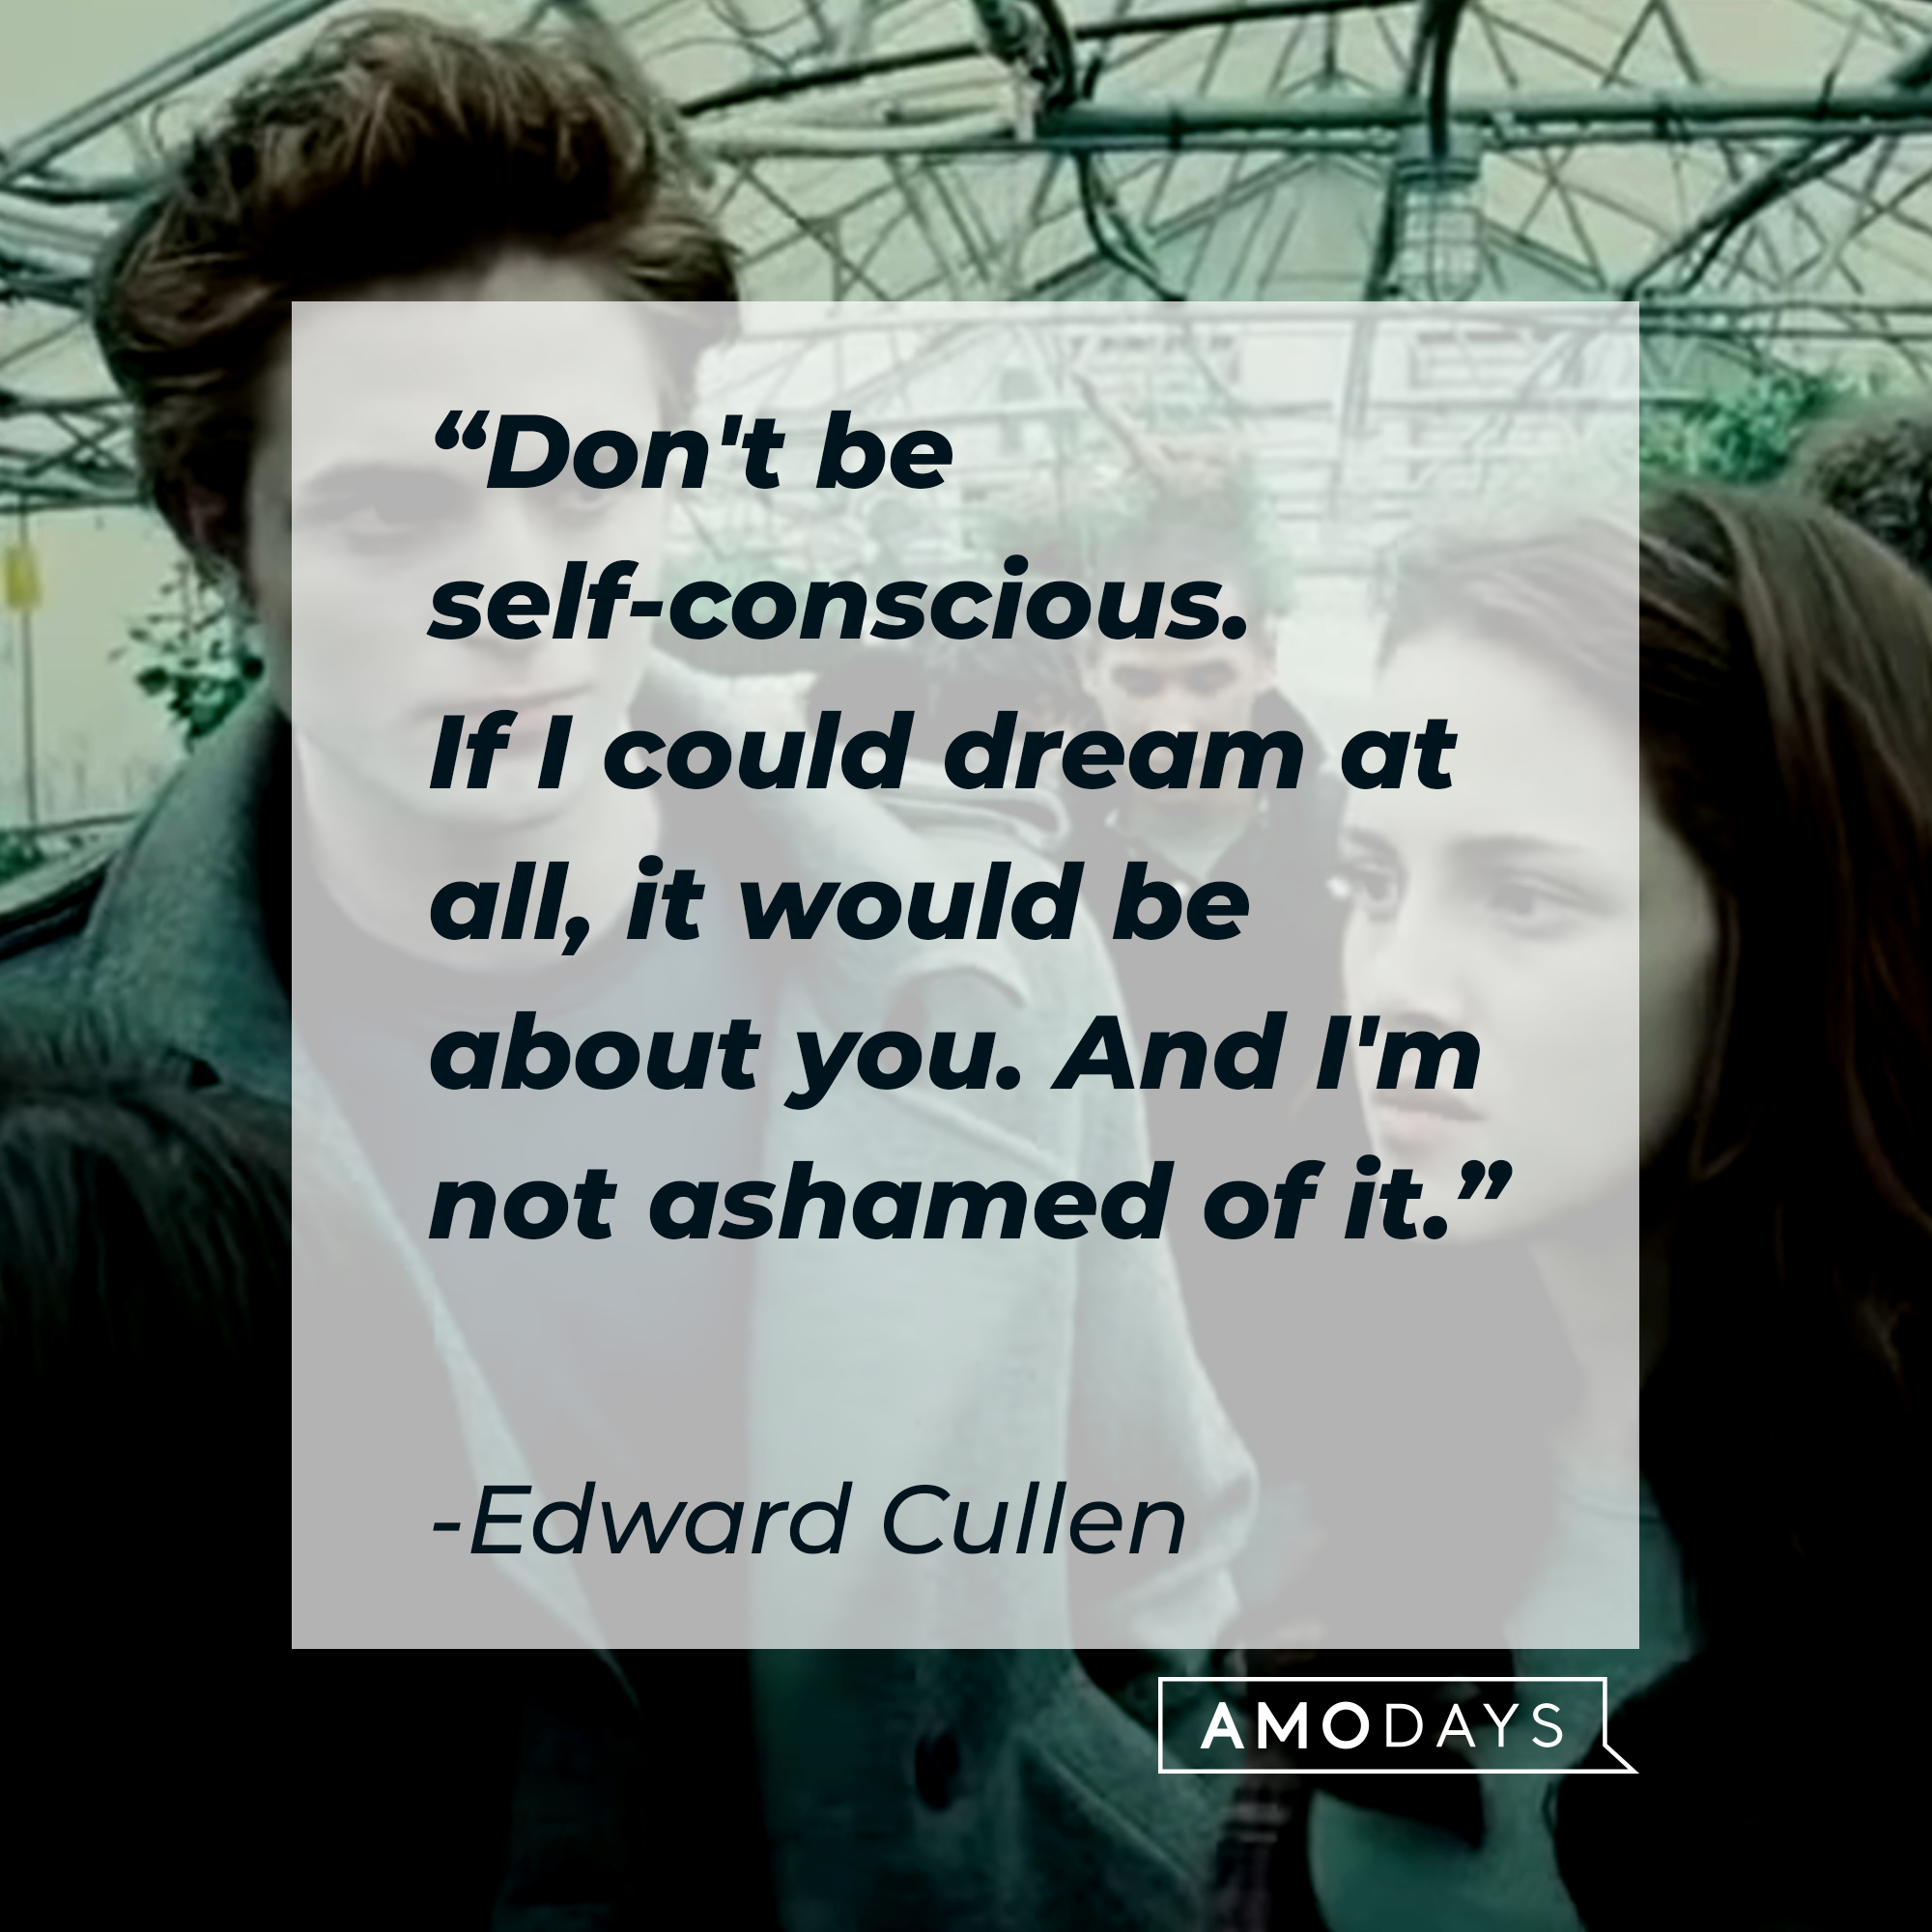 Edward Cullen's quote: “Don't be self-conscious. If I could dream at all, it would be about you. And I'm not ashamed of it.” | Source: facebook.com/twilight